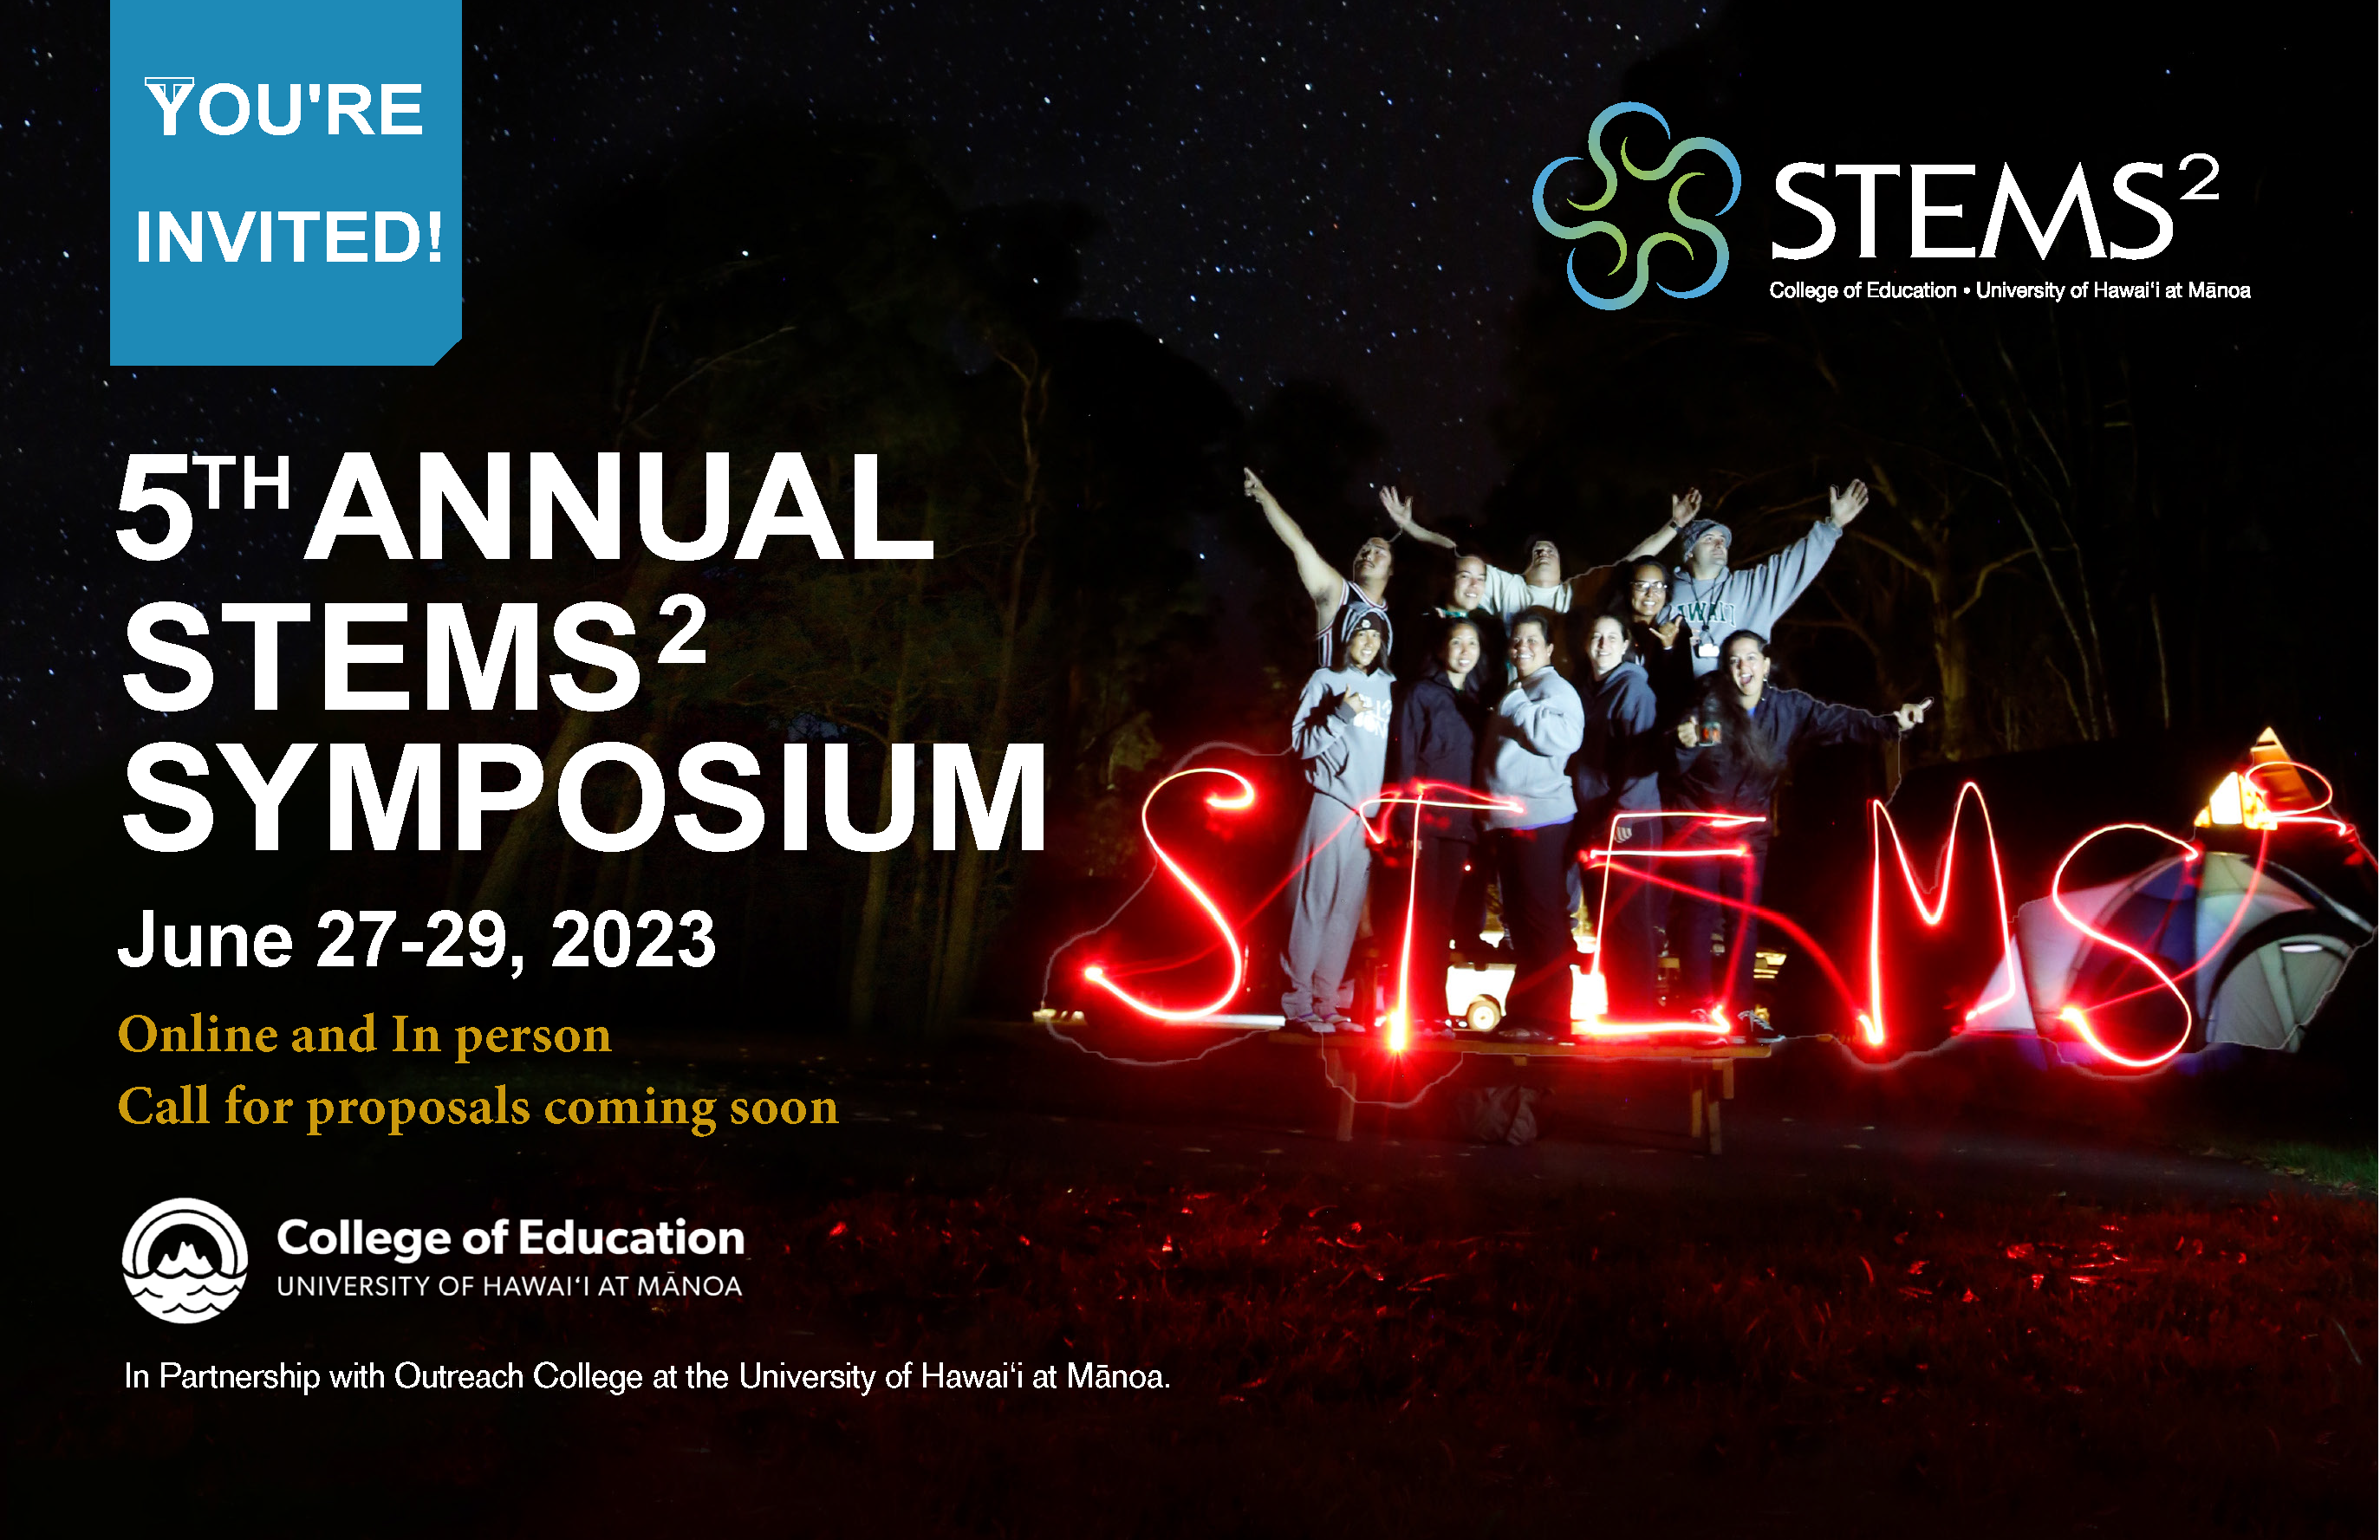 Save the date for the 5th annual STEMS^2 Symposium